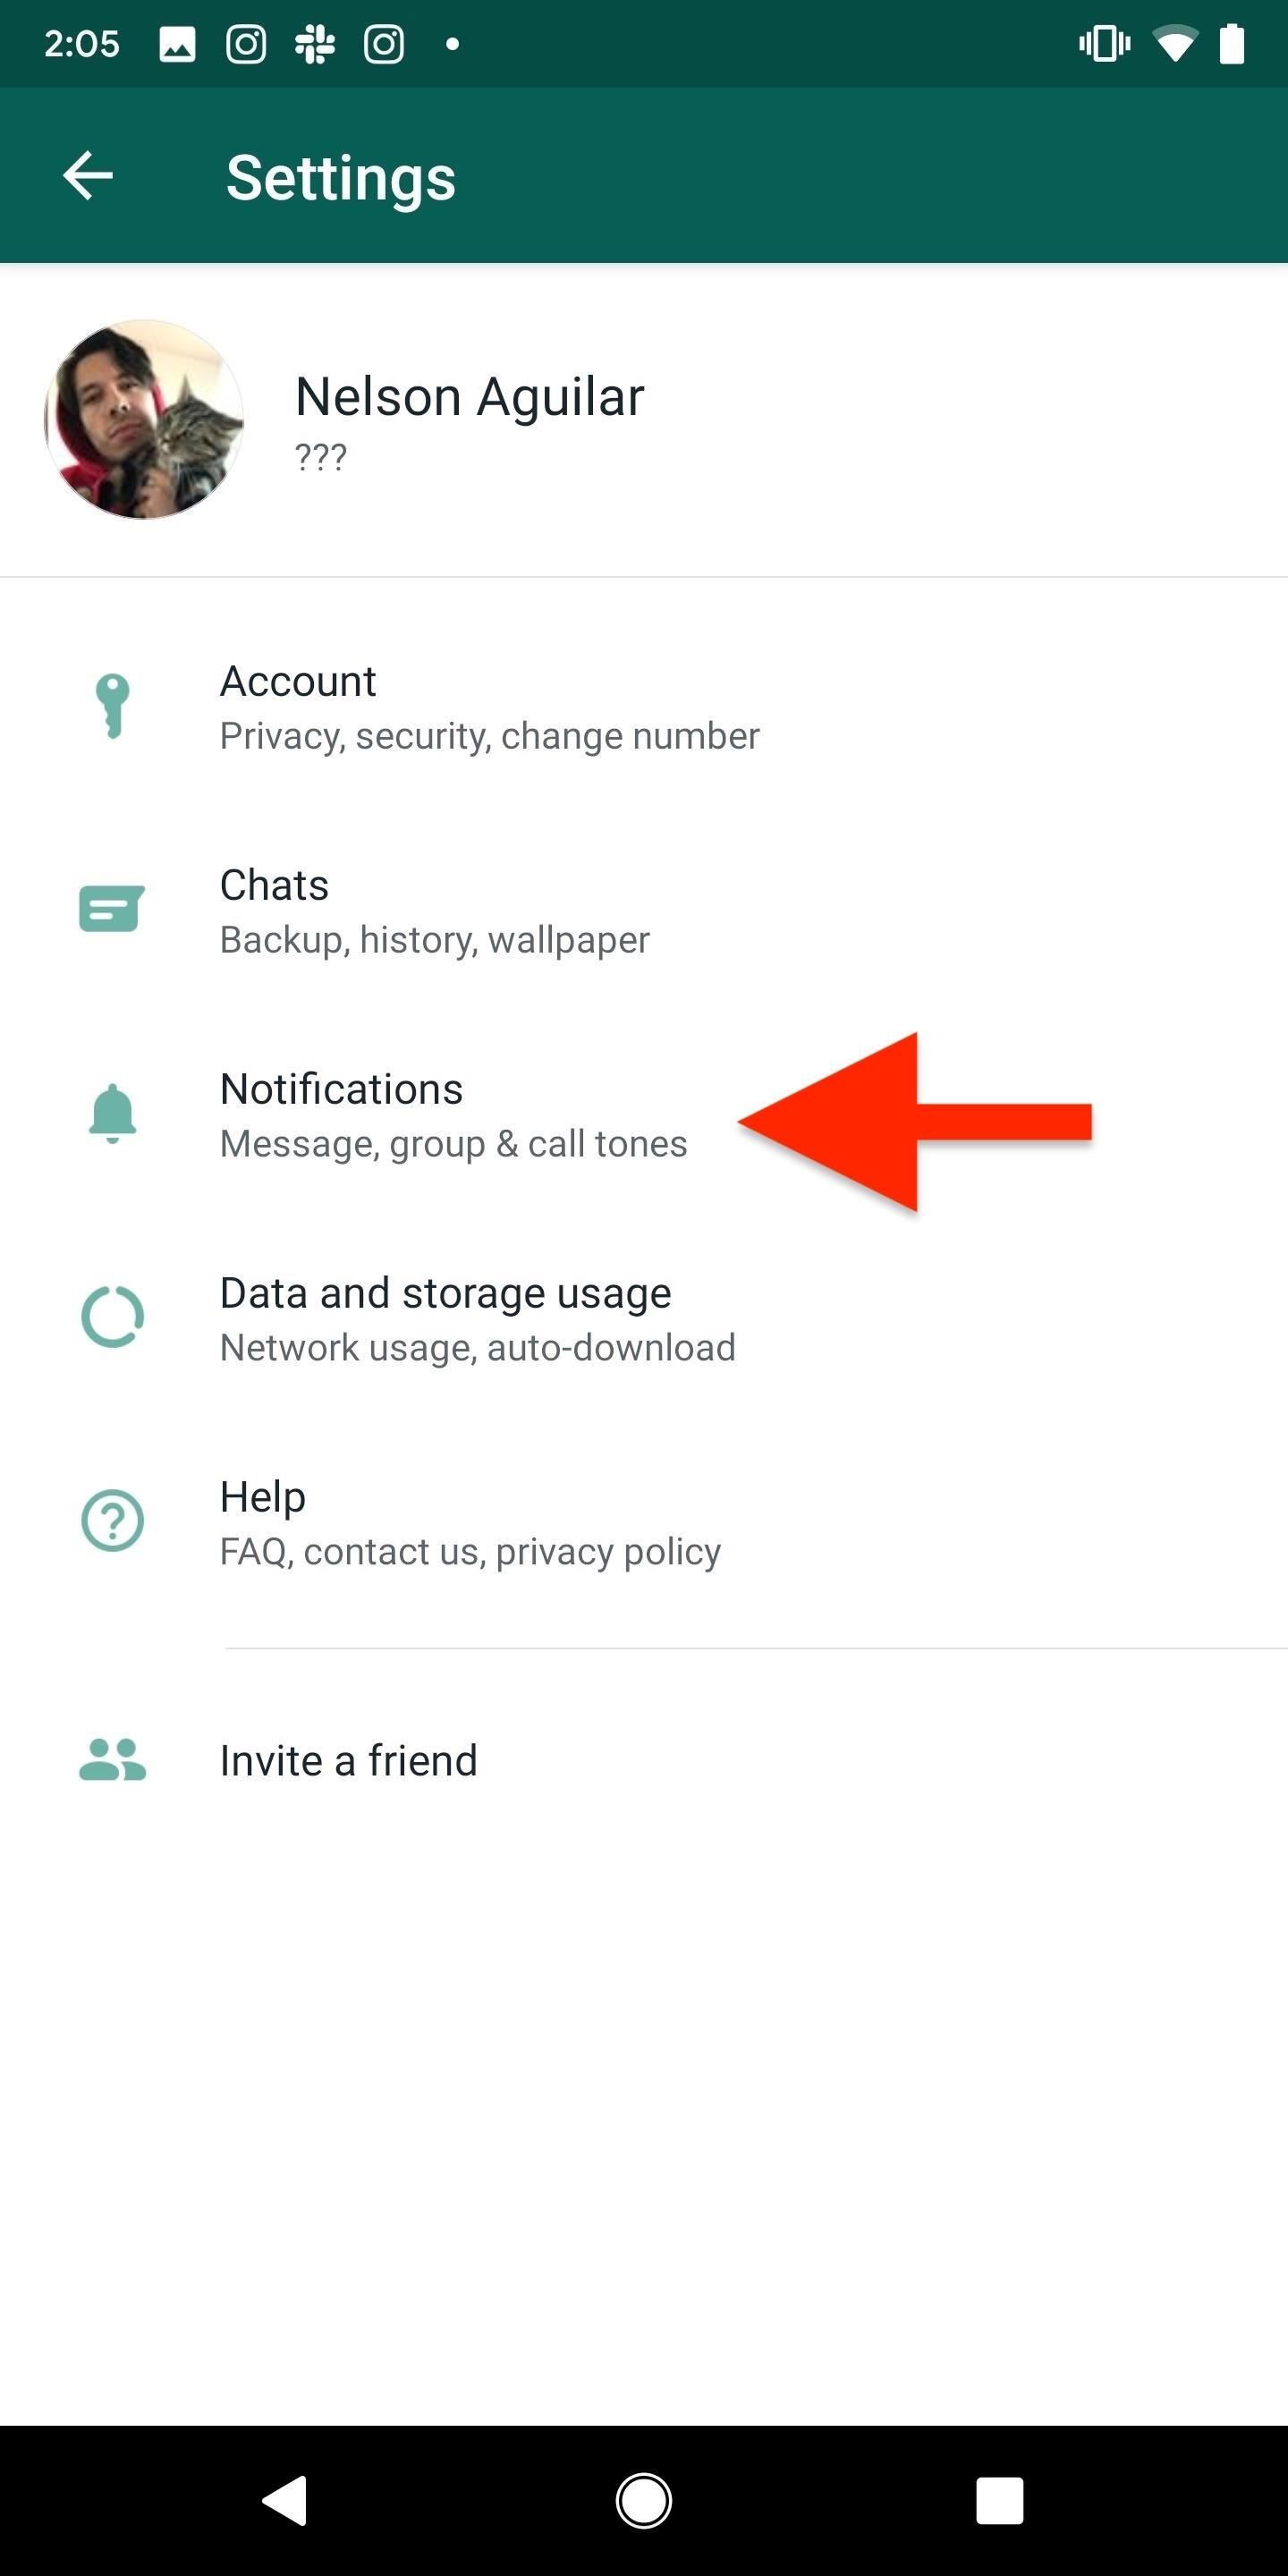 How to Mute or Leave Group Chats in WhatsApp, So You Never Get Annoyed by Notifications